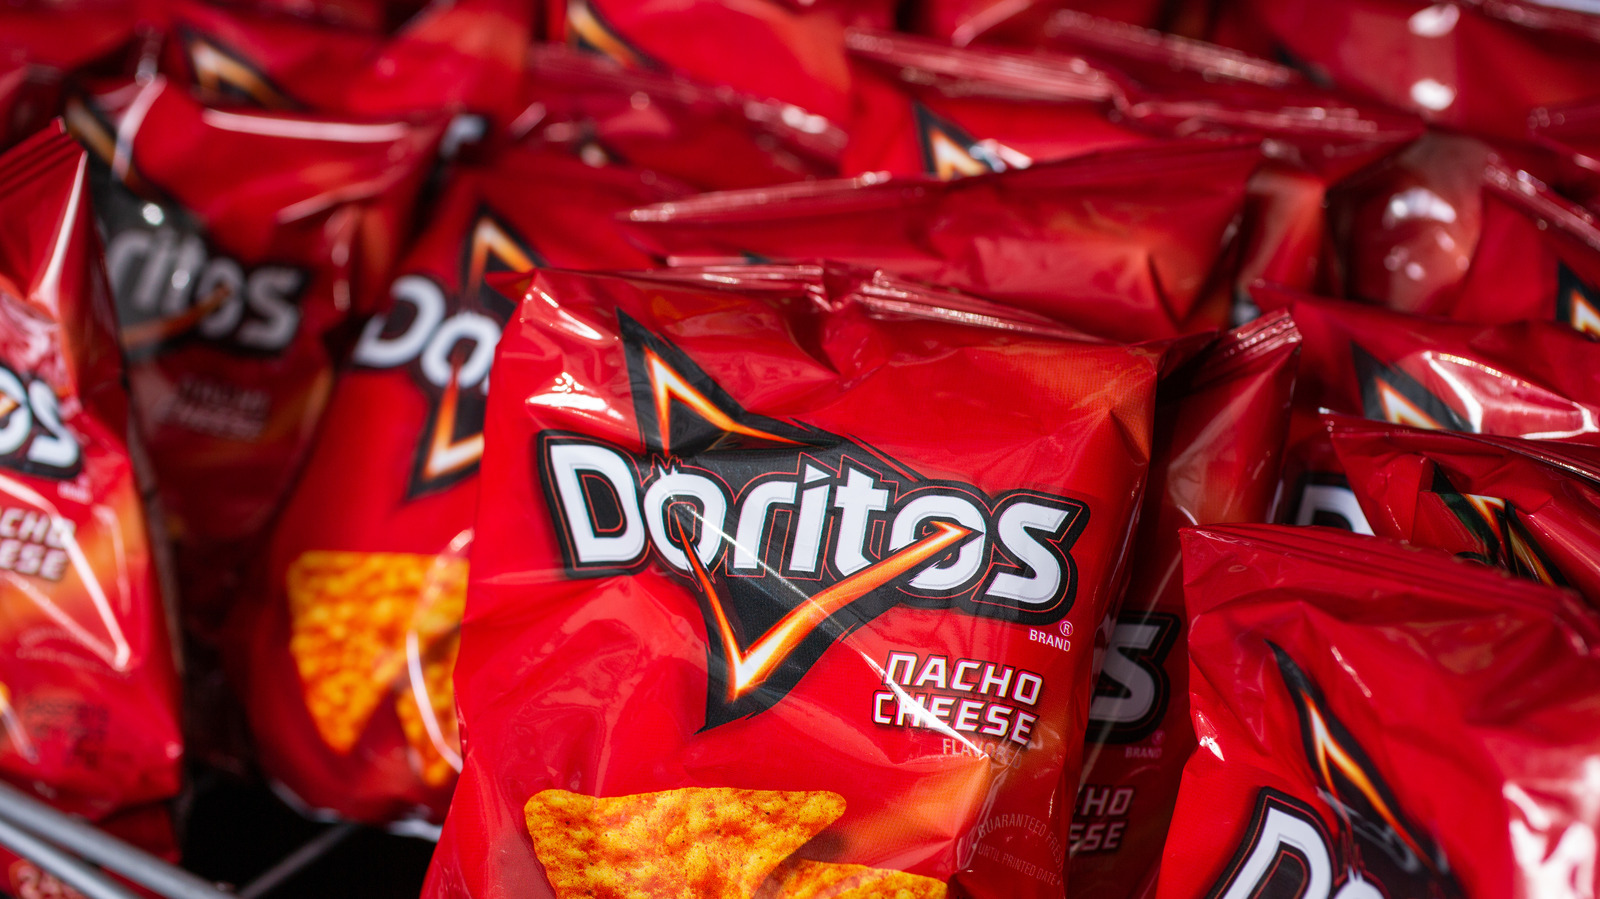 Lay's Is Releasing Potato Chips That Are Dusted With Doritos Cool Ranch  Flavoring